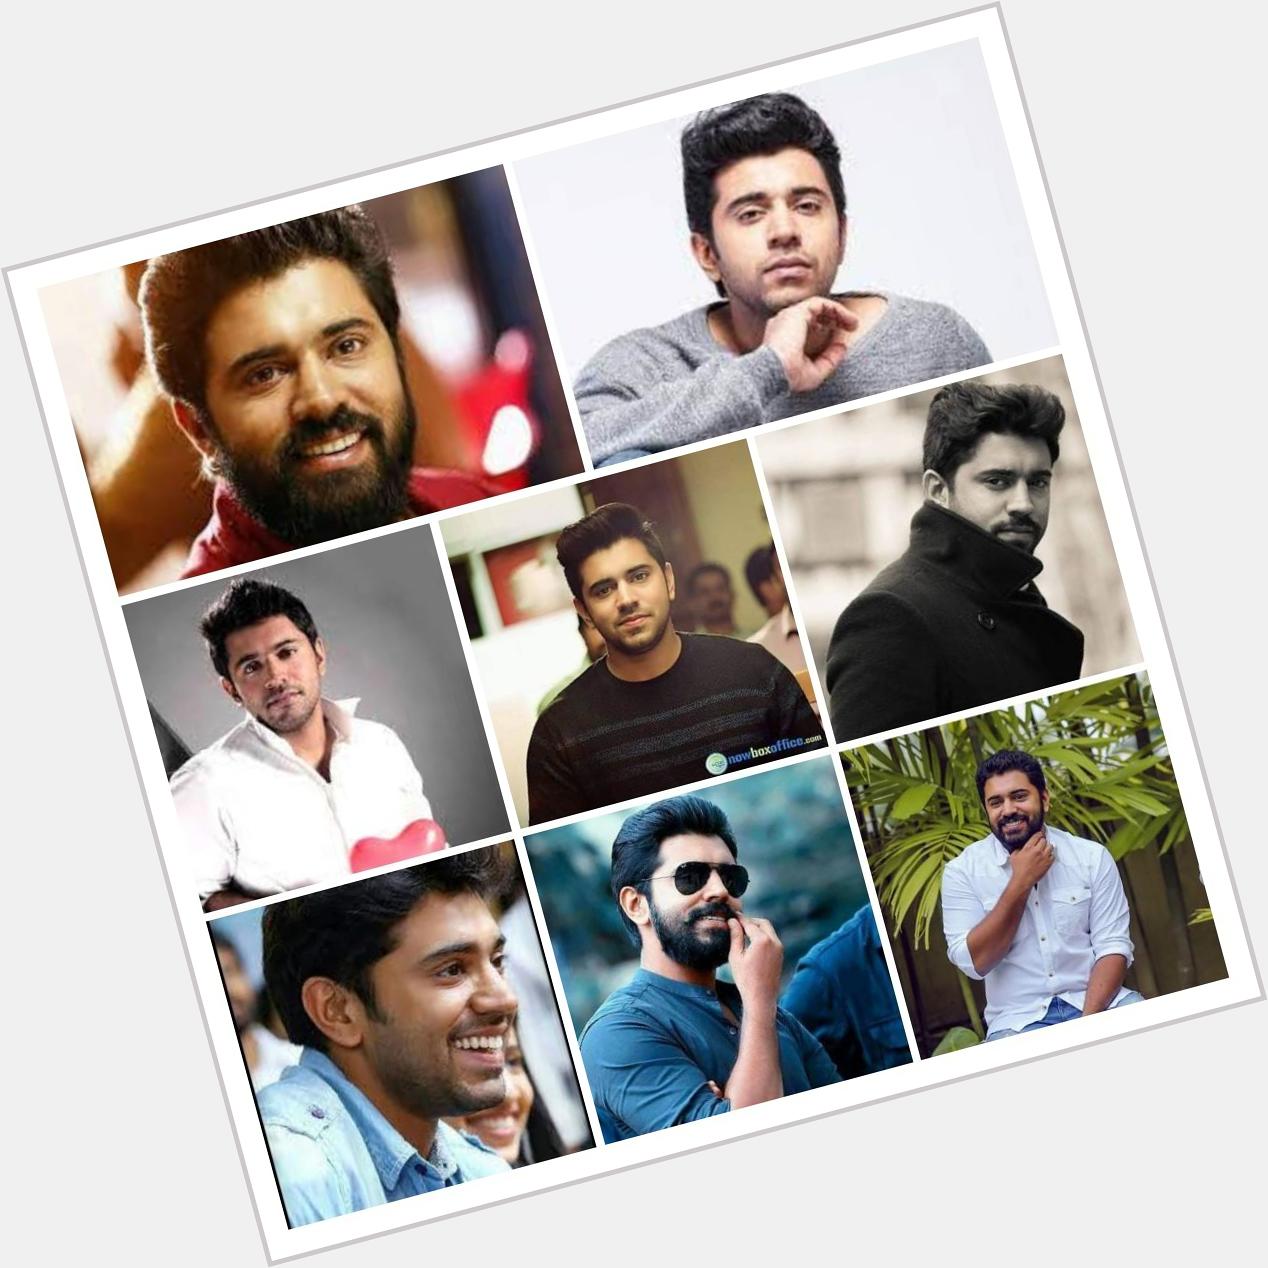  Happy birthday Nivin pauly       ..none can replace u in waiting fr 